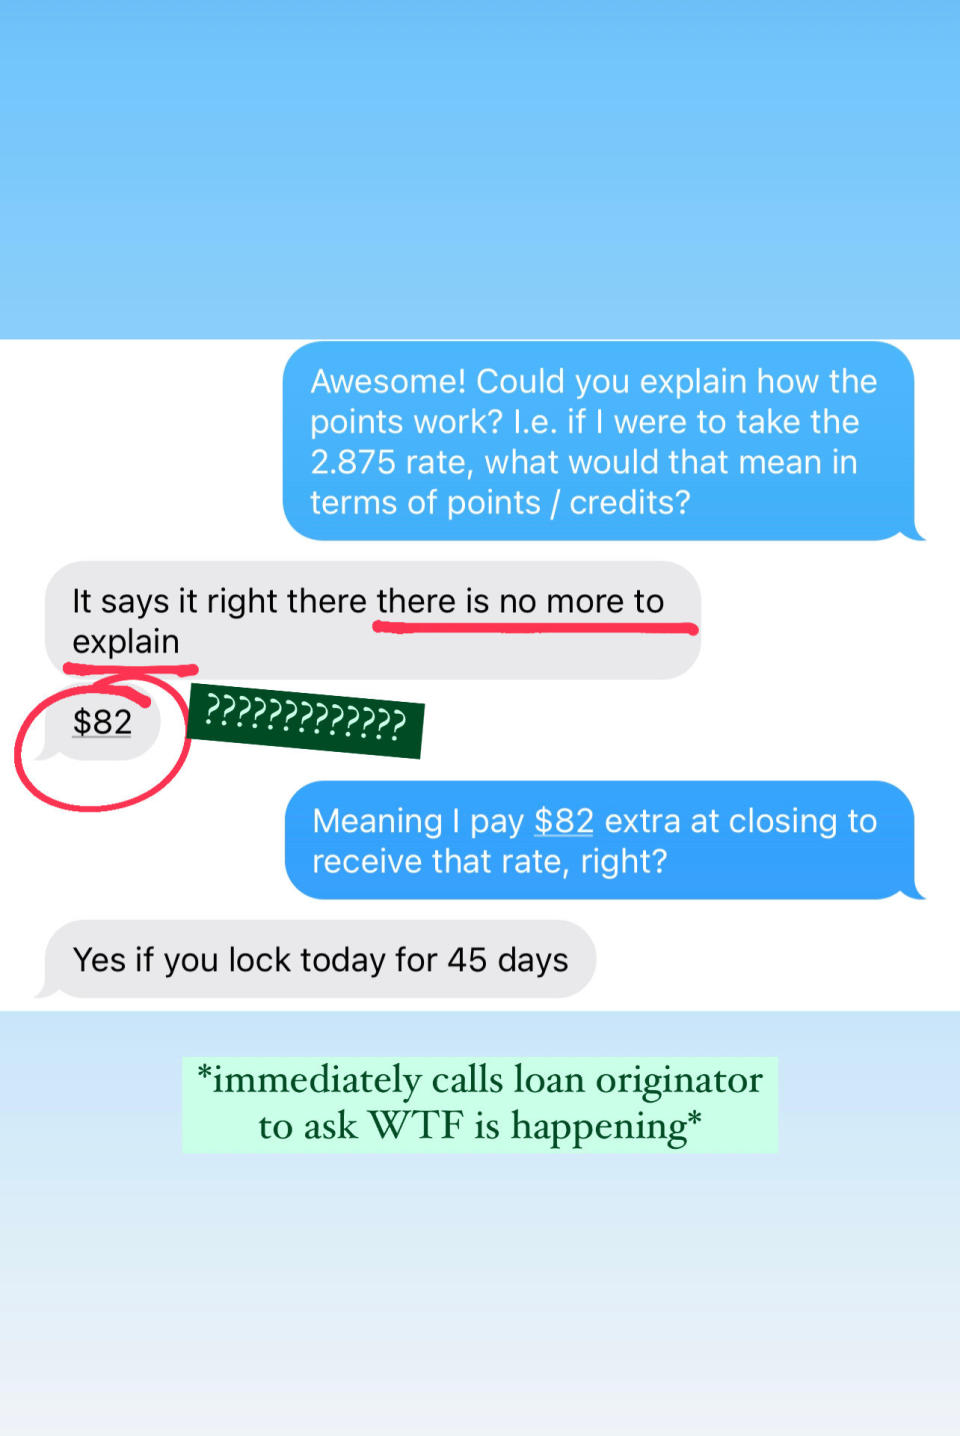 Confusing text exchange between author and loan originator with text: "immediately calls loan originator to ask WTF is happening"